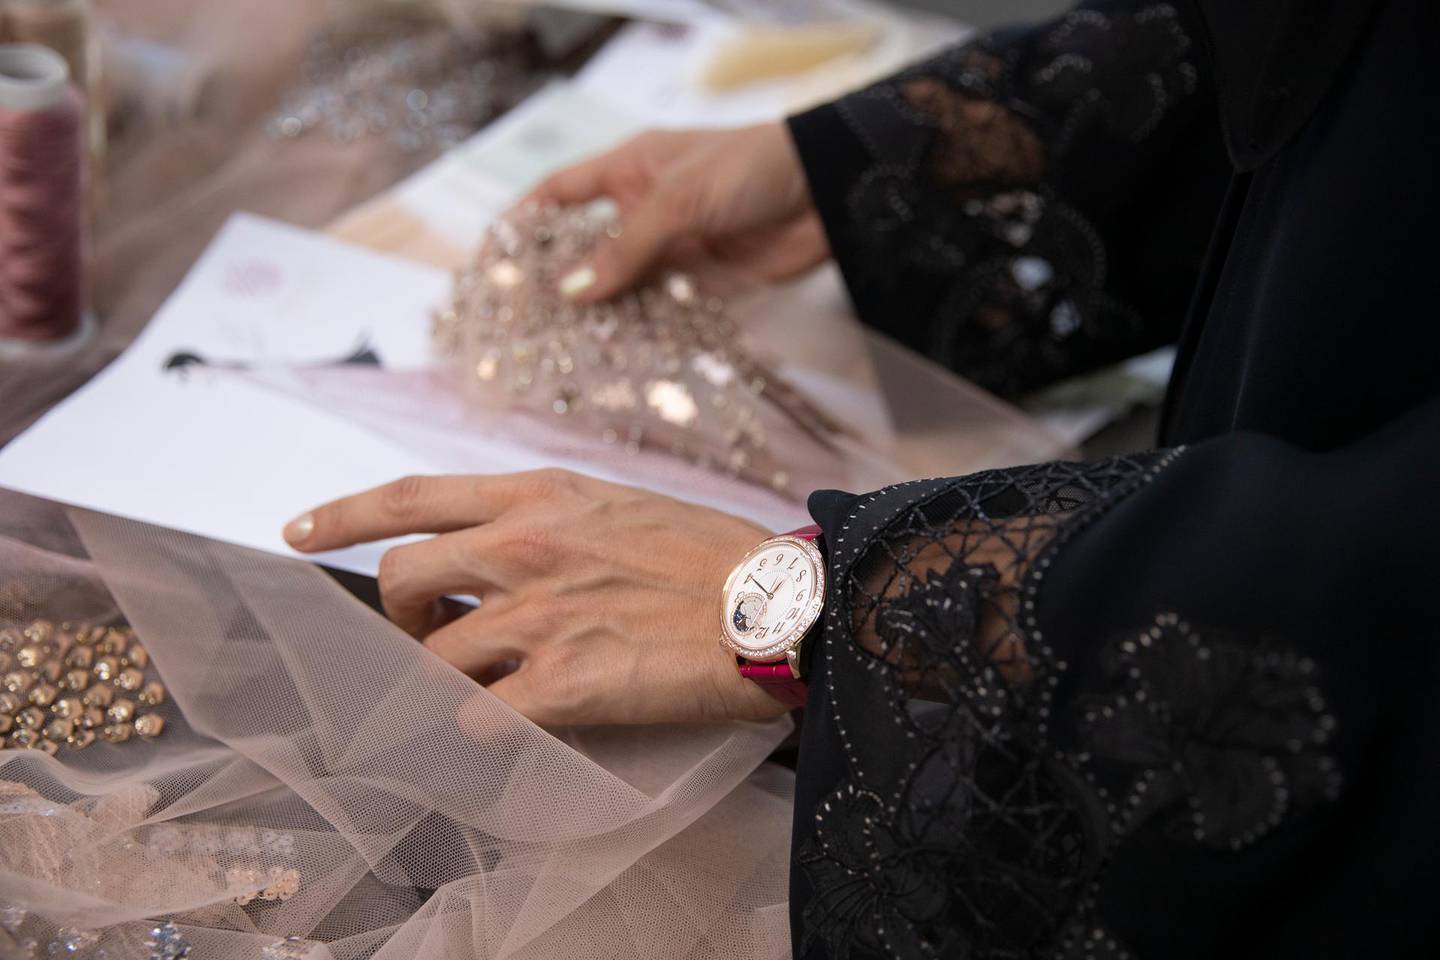 A lucky student will receive insight into the art of dressmaking. Courtesy Vacheron Constantin